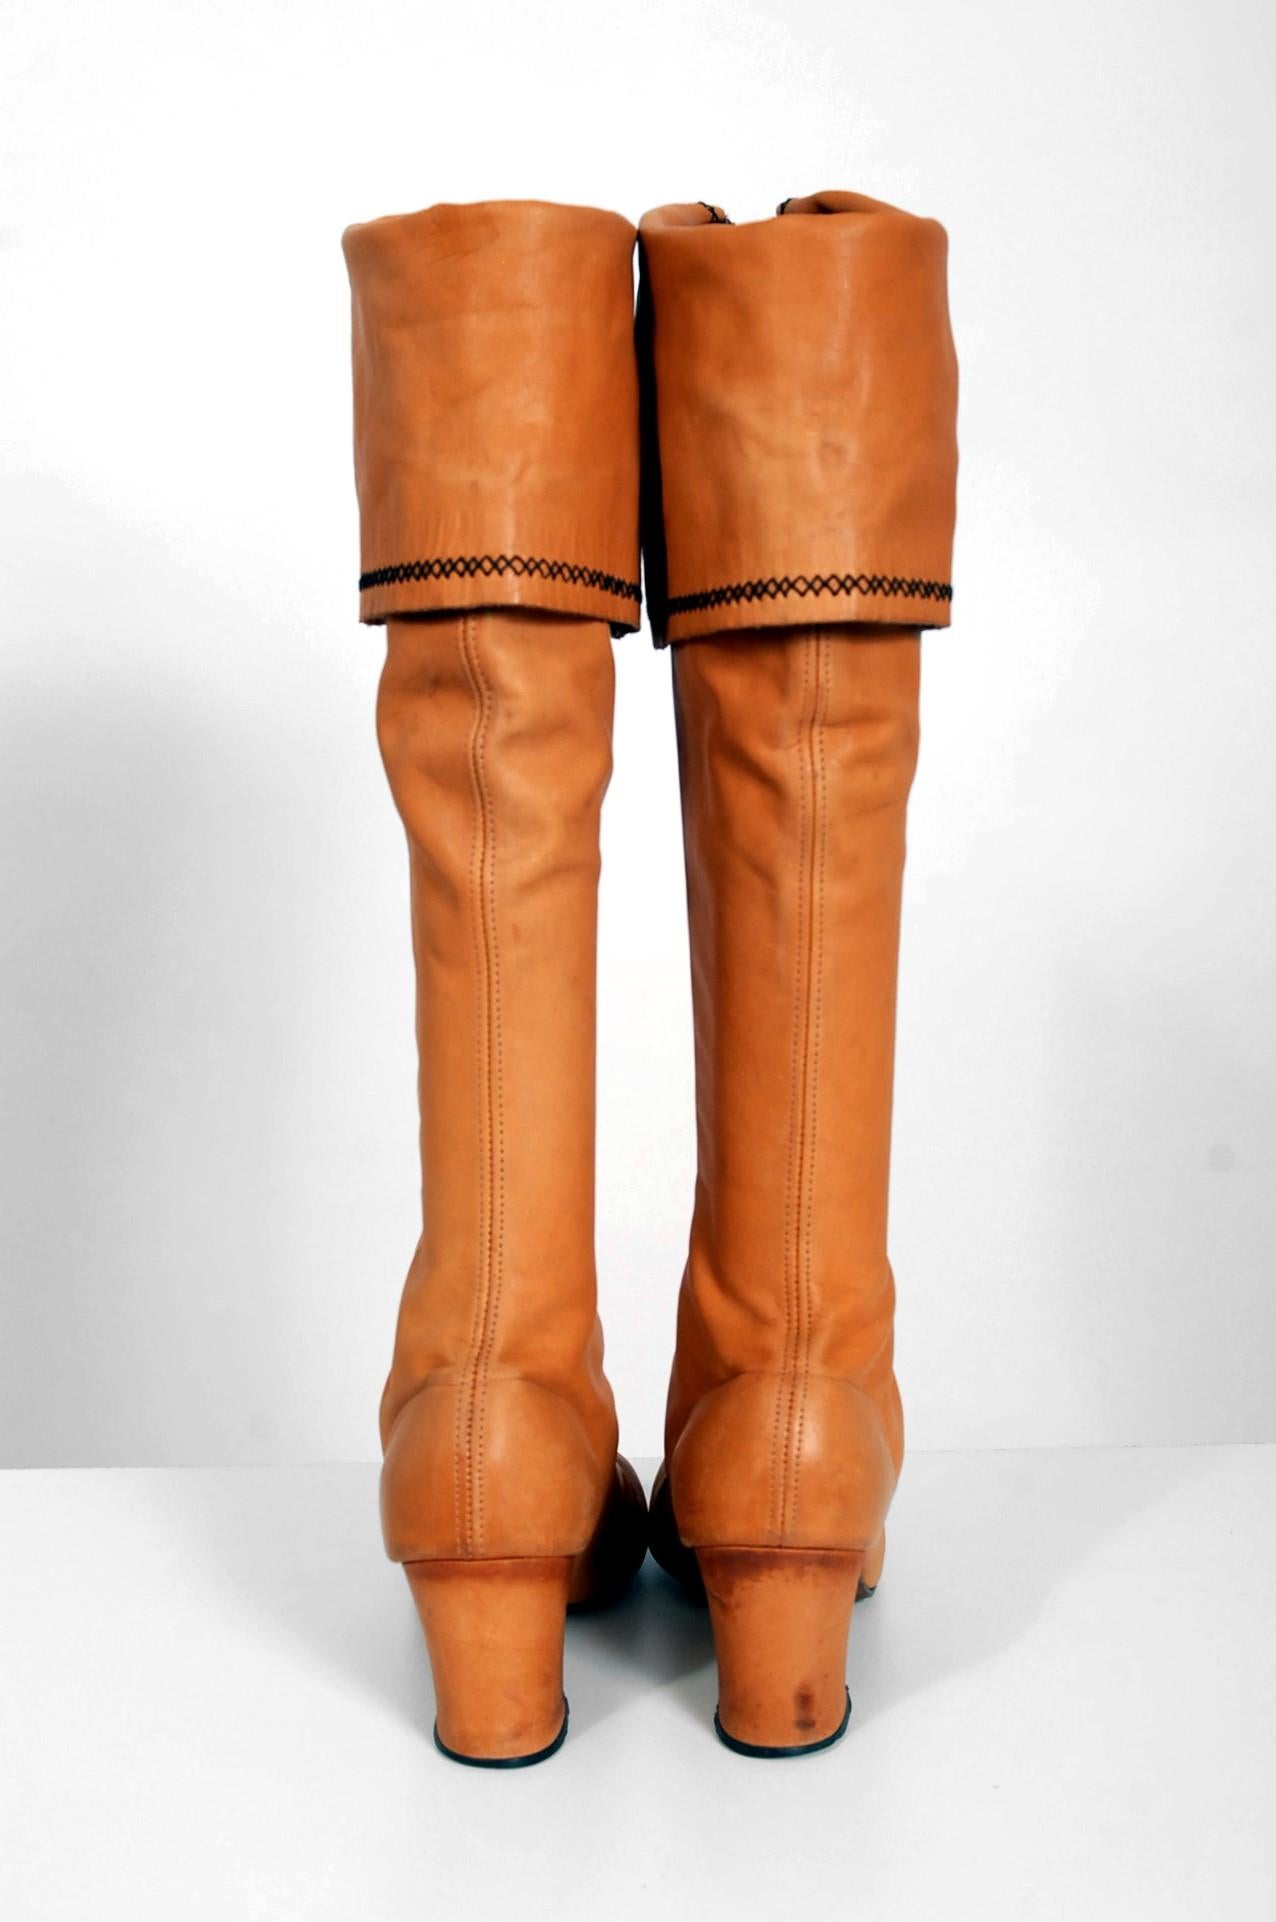 Vintage 1970's Tan Brown Leather Wide-Cuff Knee High Bohemian Pirate Boots   1